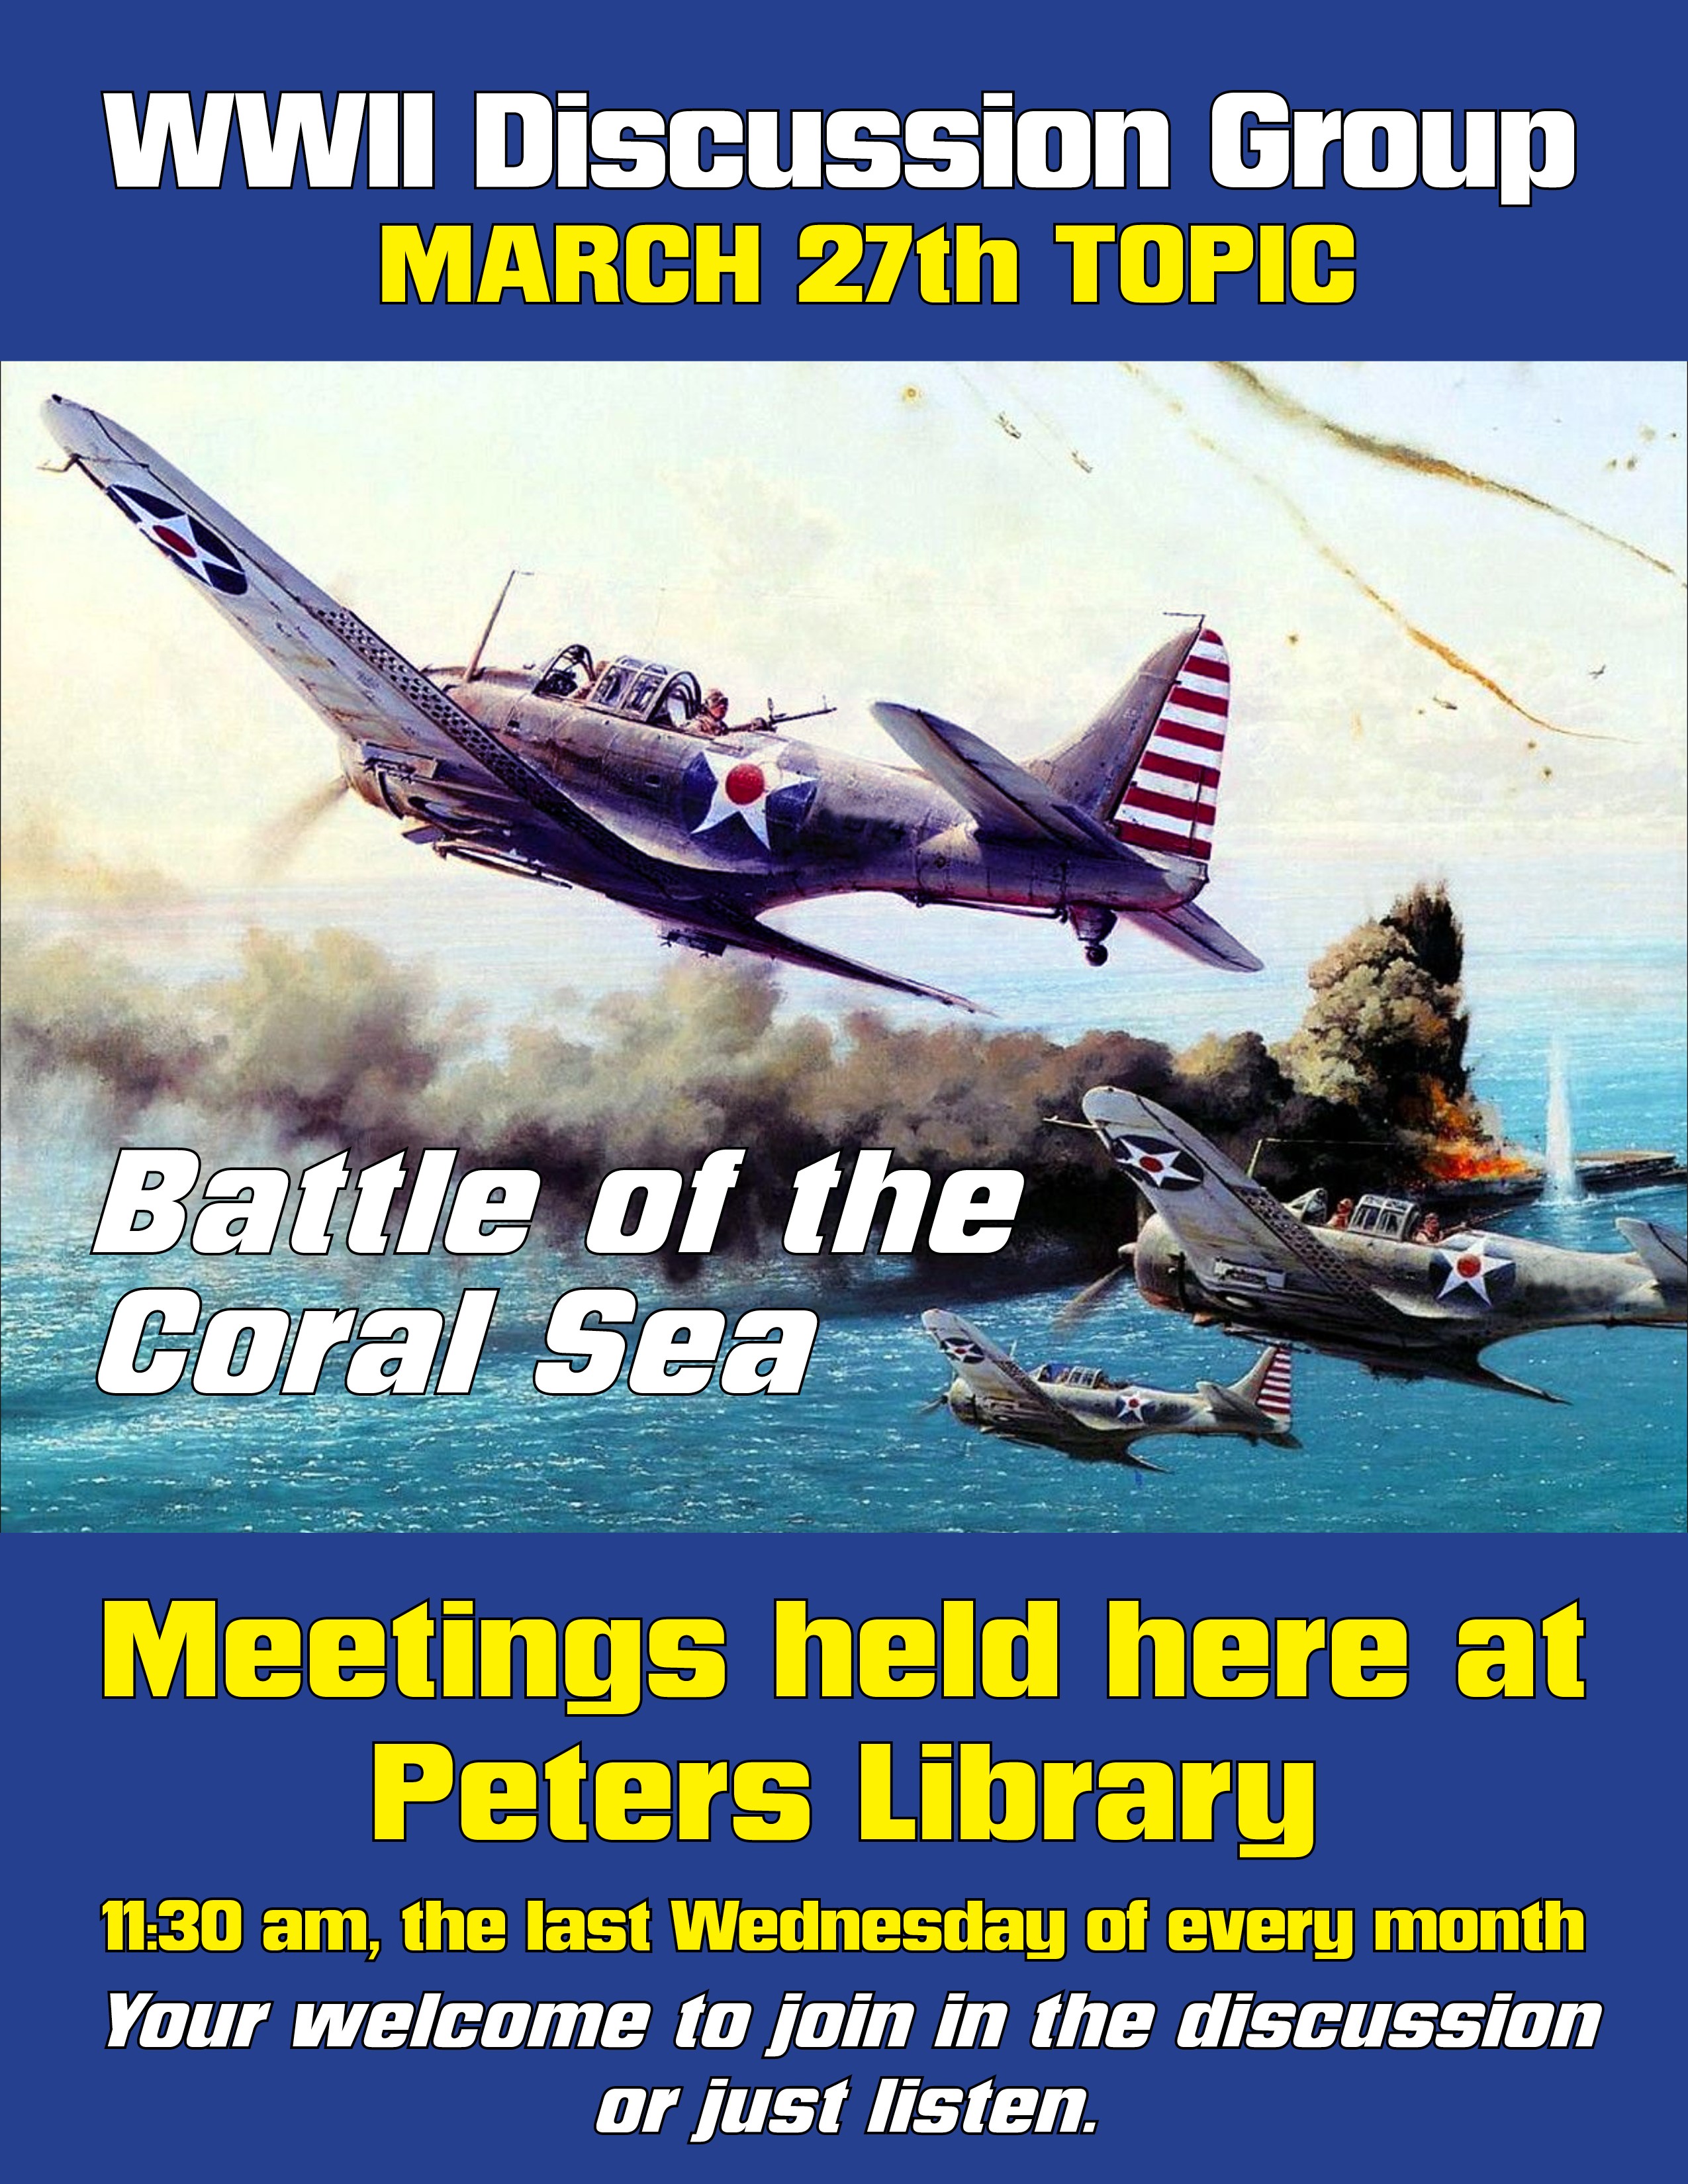 ww2 discussion group last wednesday of the month at 11:30 am march topic battle of the coral sea